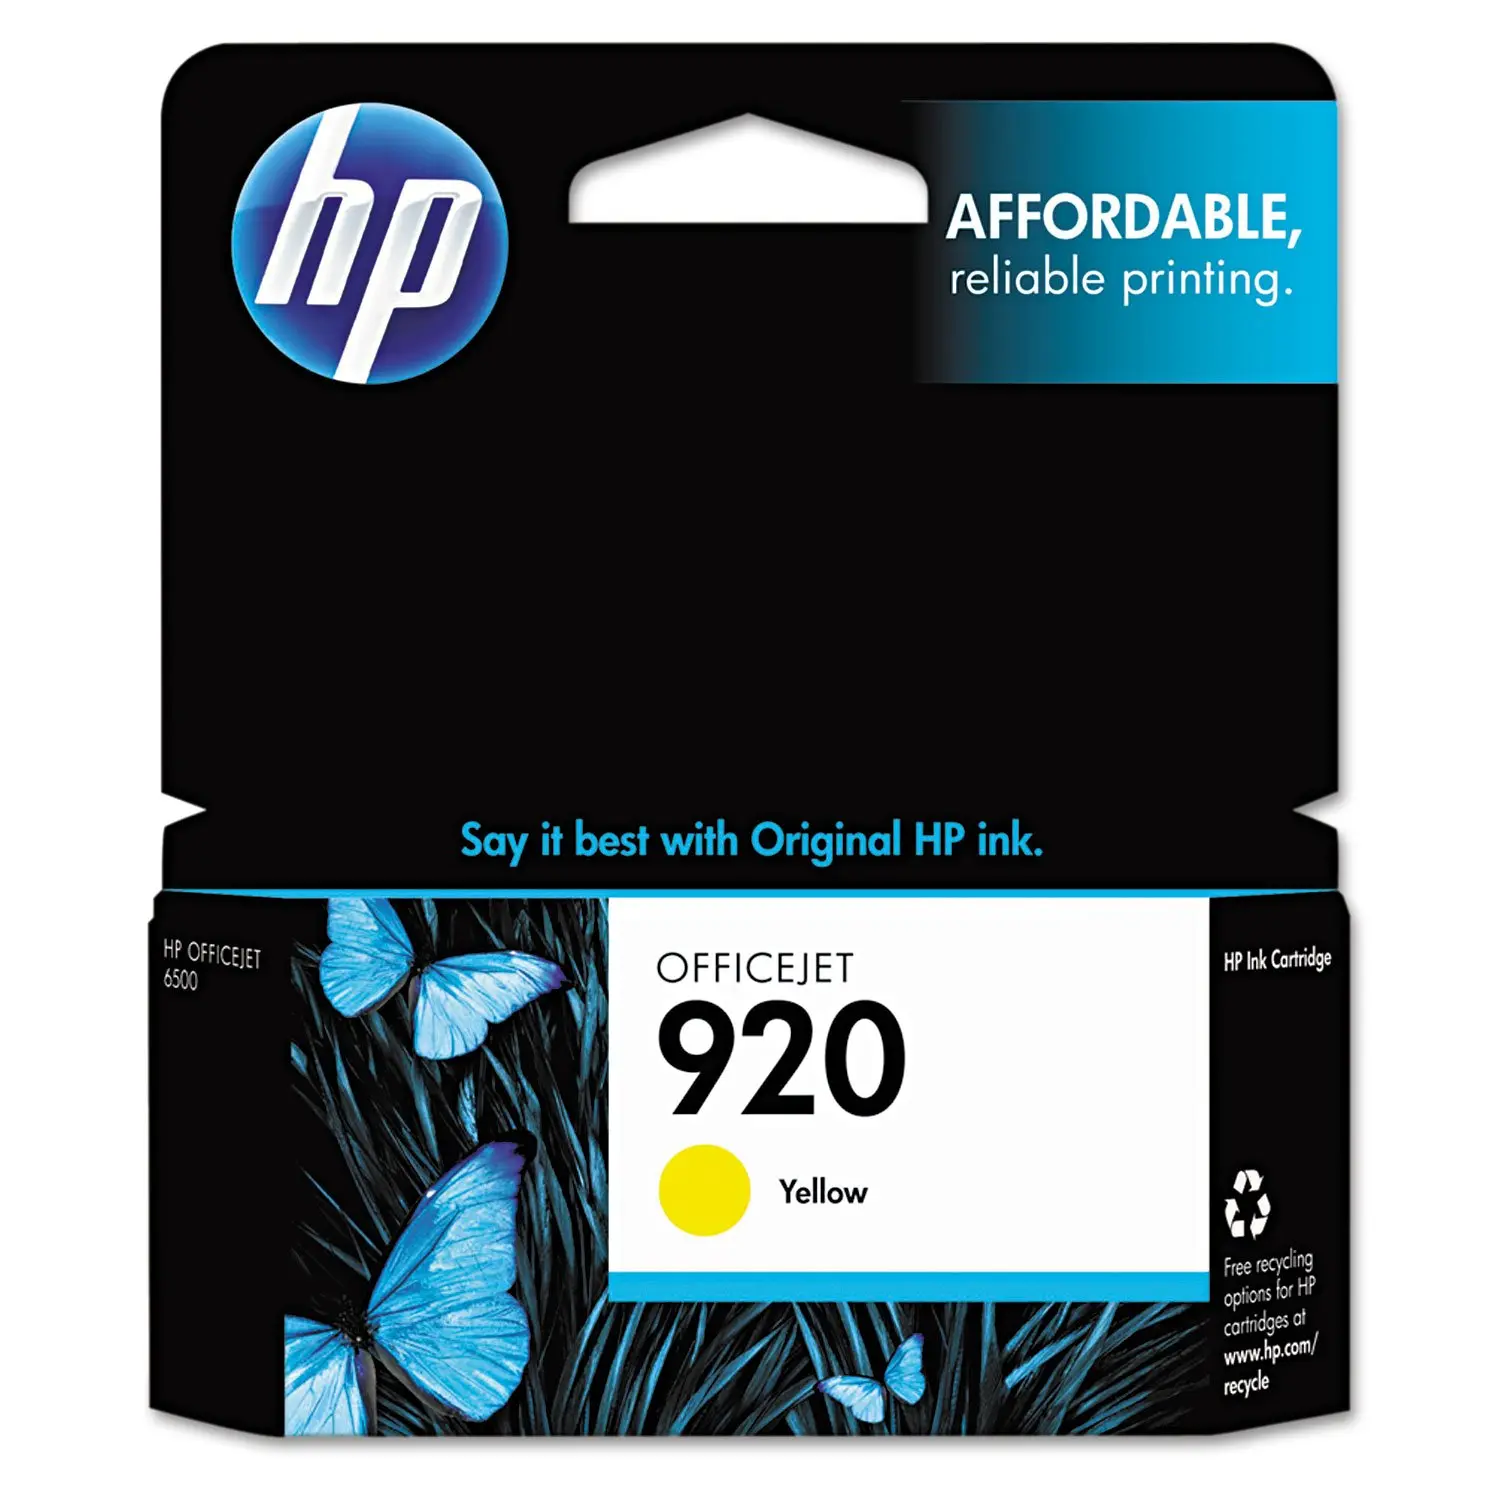 Hp officejet 6500 ink cartridges: high-quality solution for inkjet printing